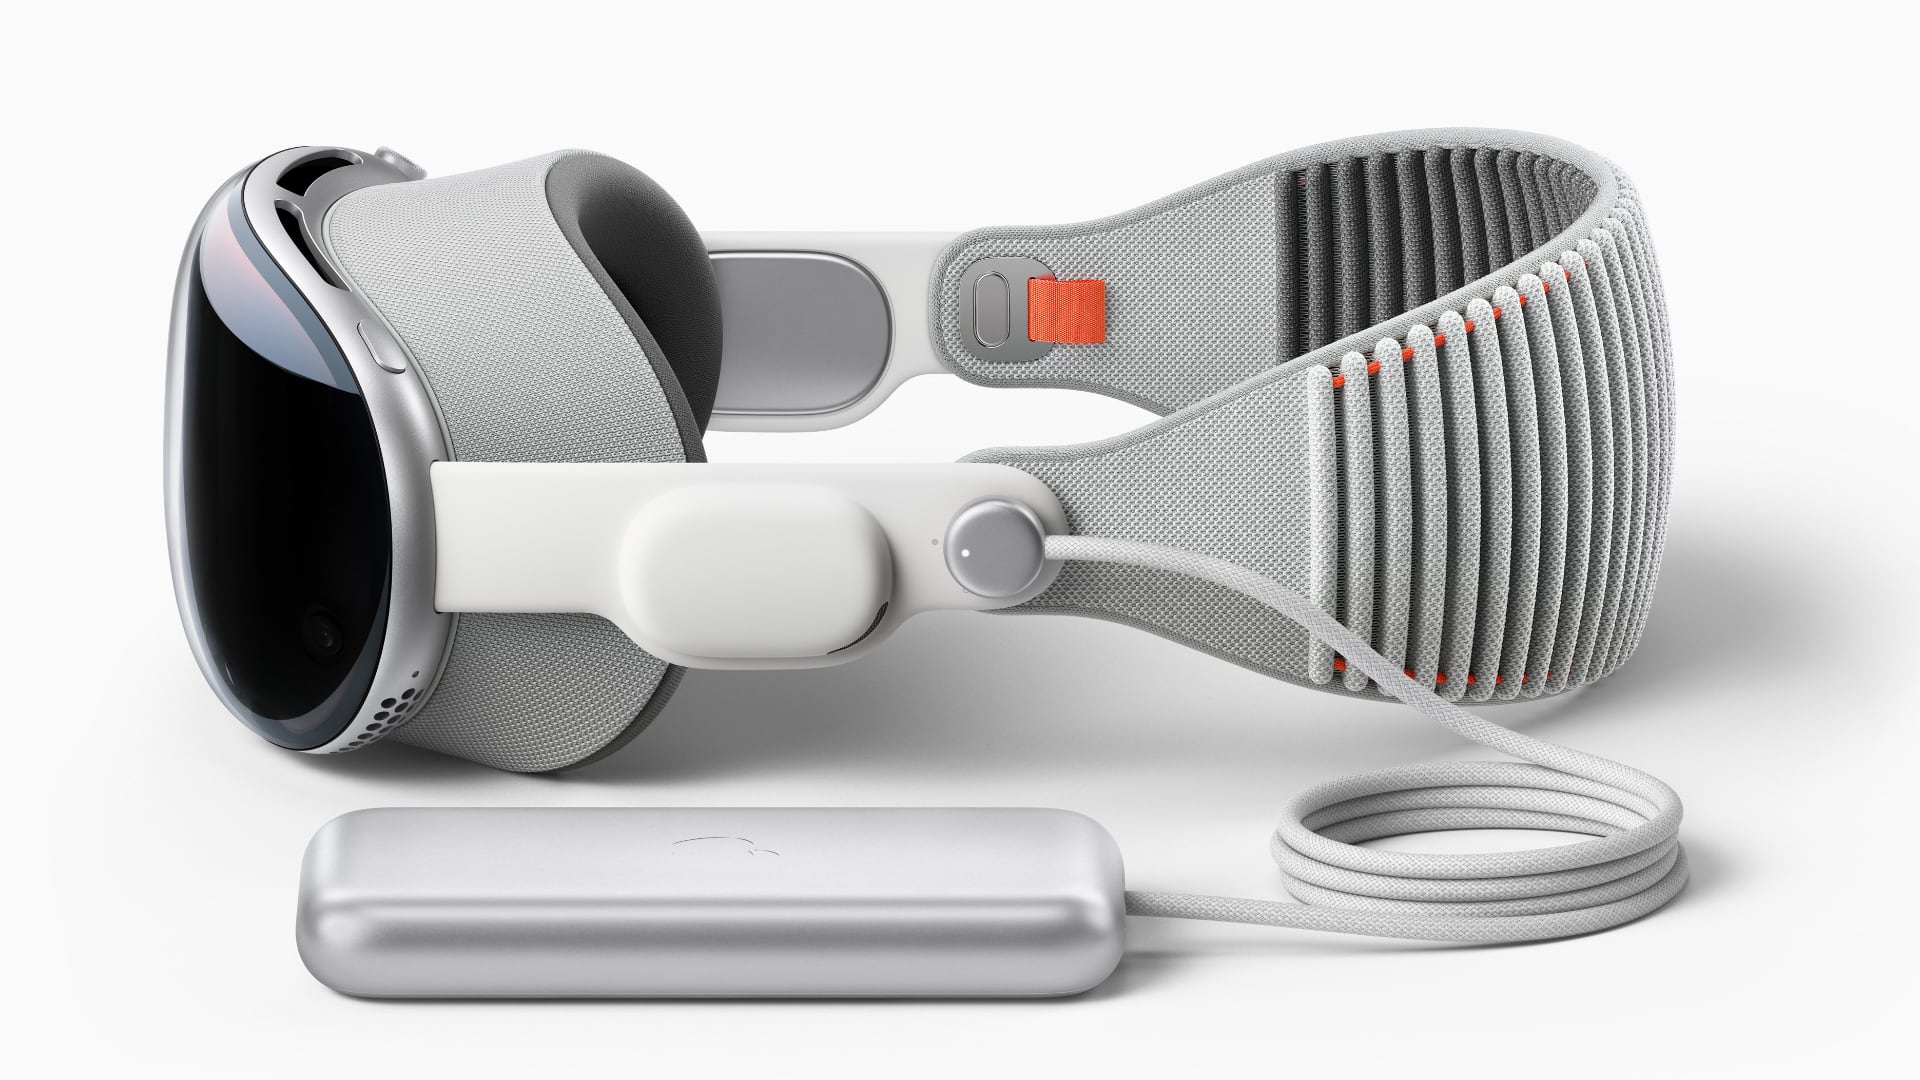 The left side of Apple's Vision Pro headset with its external battery pack